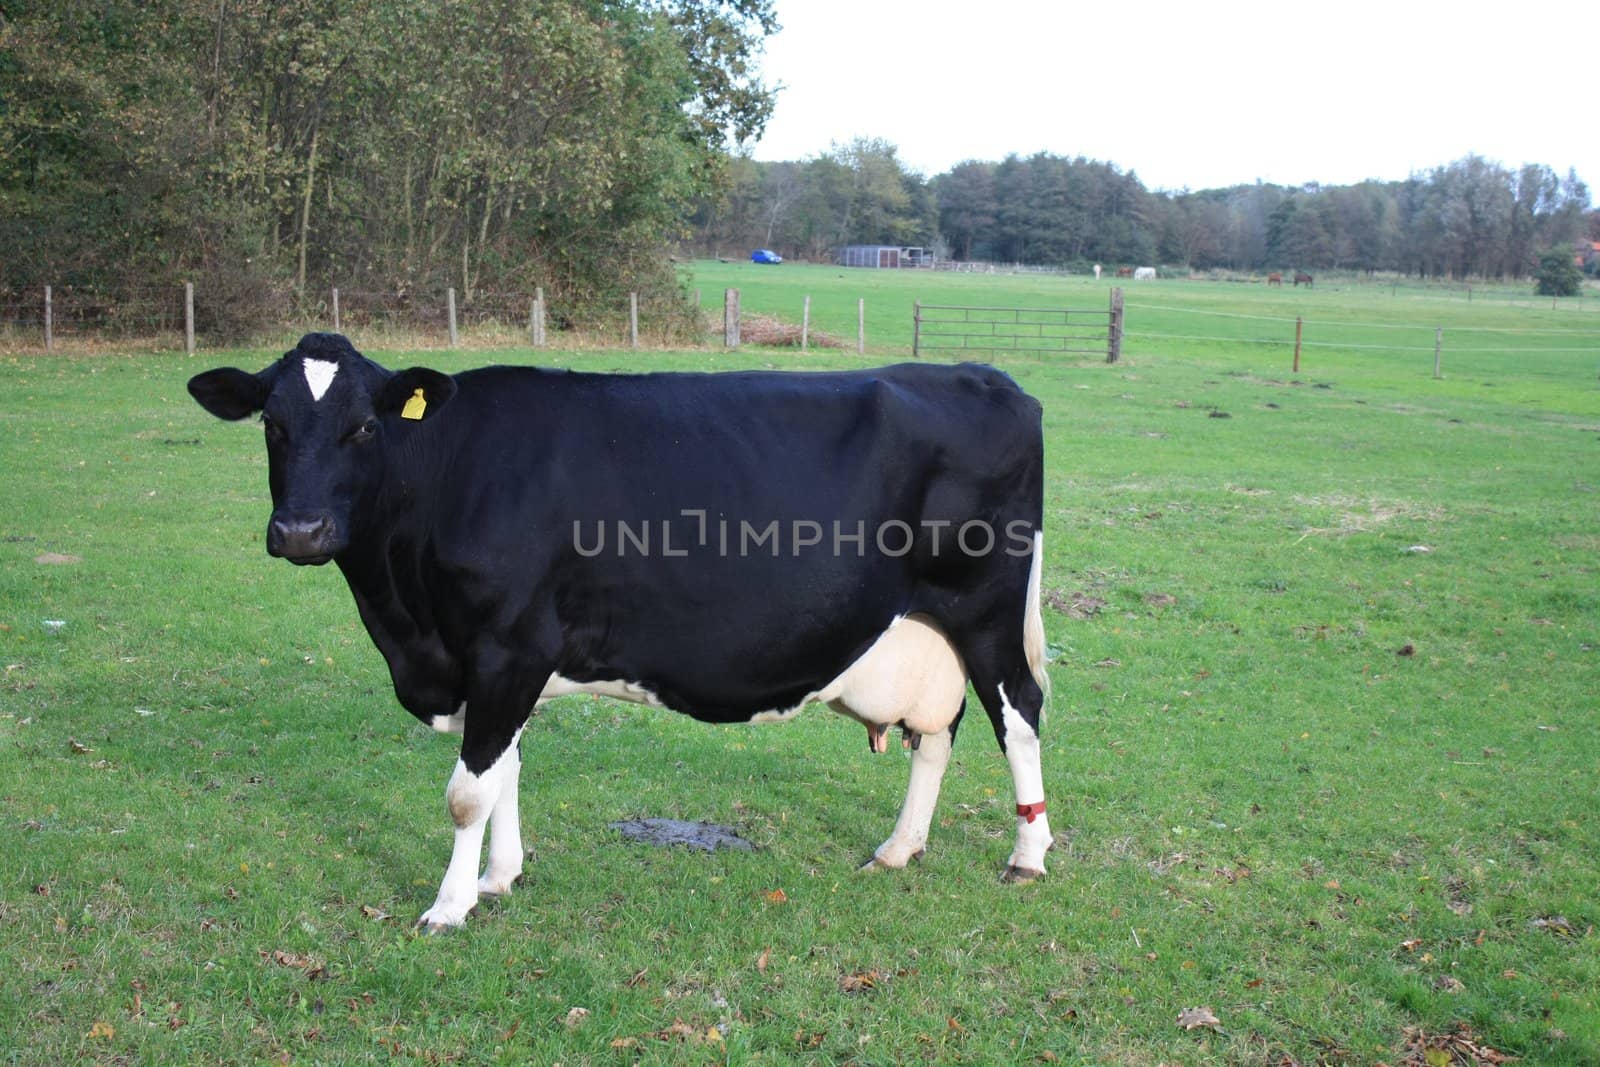 a friendly looking black cow on the grass